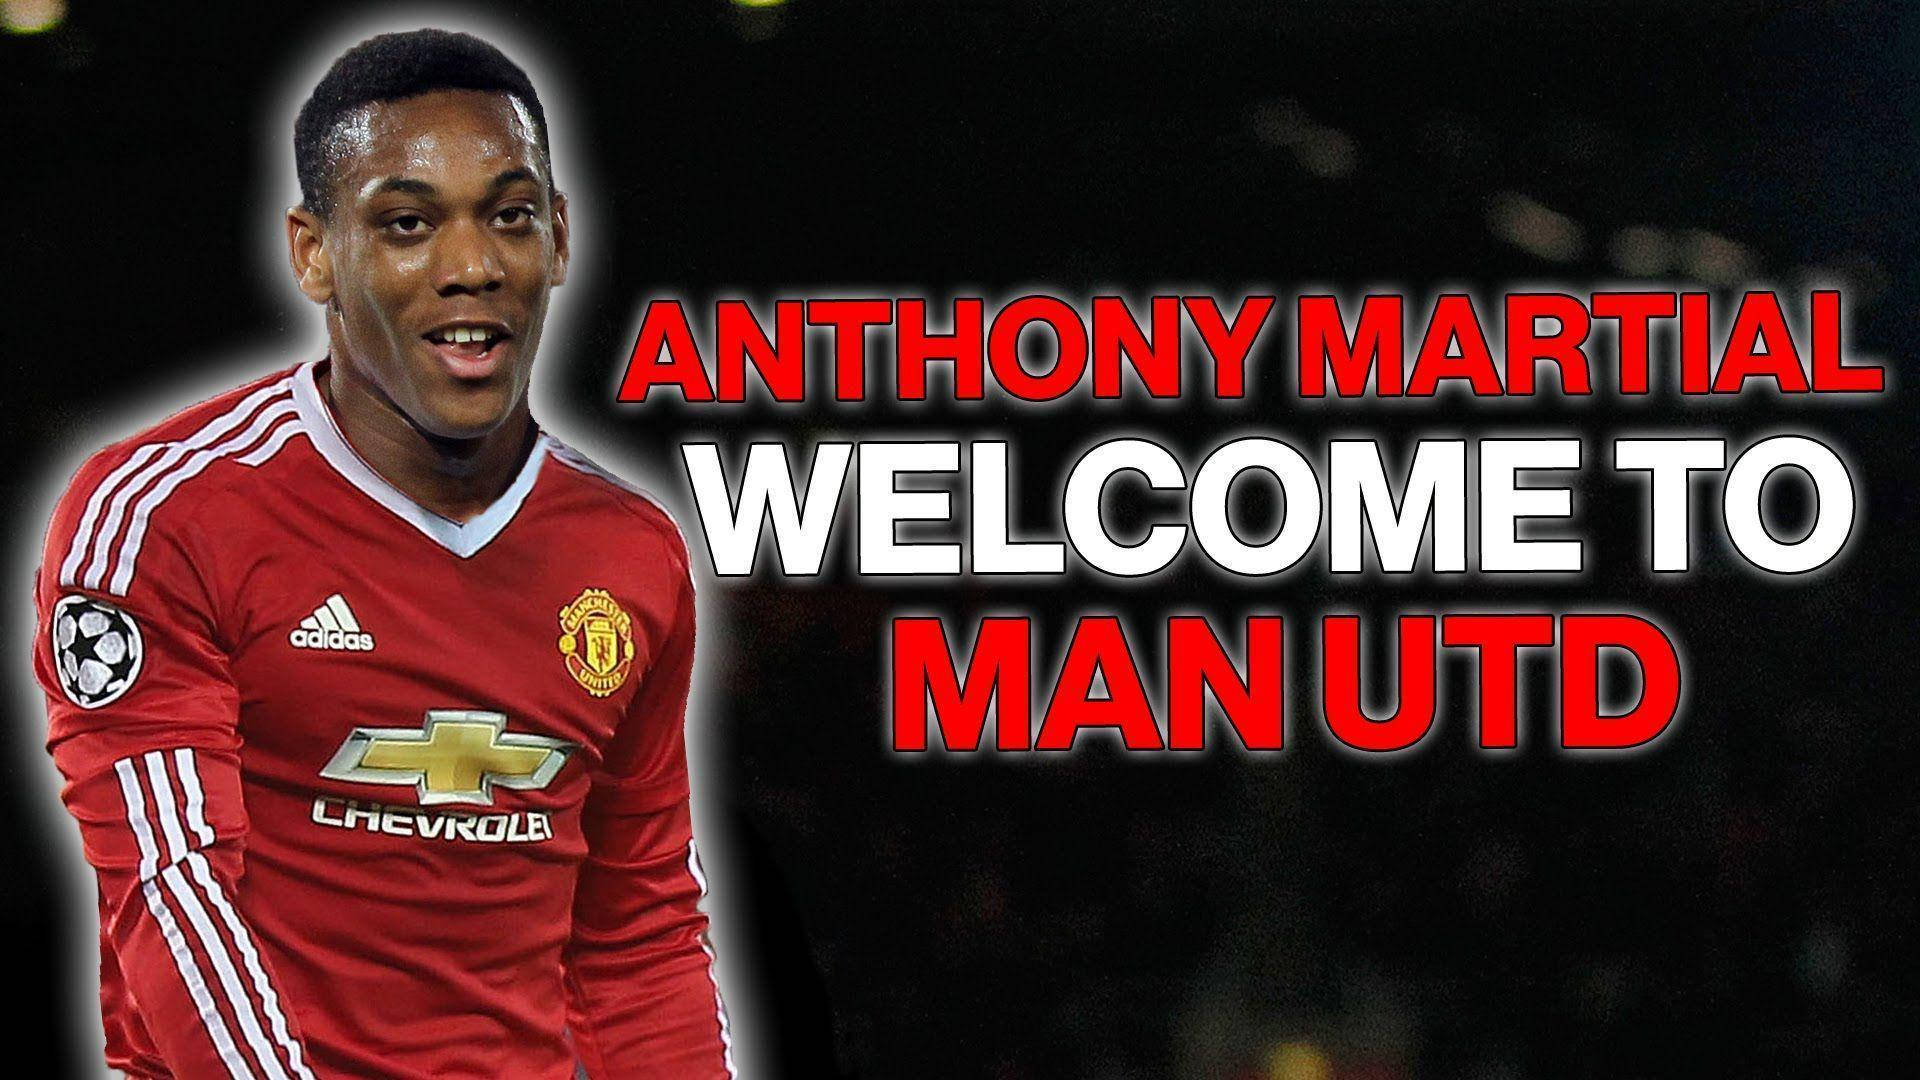 Anthony Martial Welcome Man Utd Wallpaper